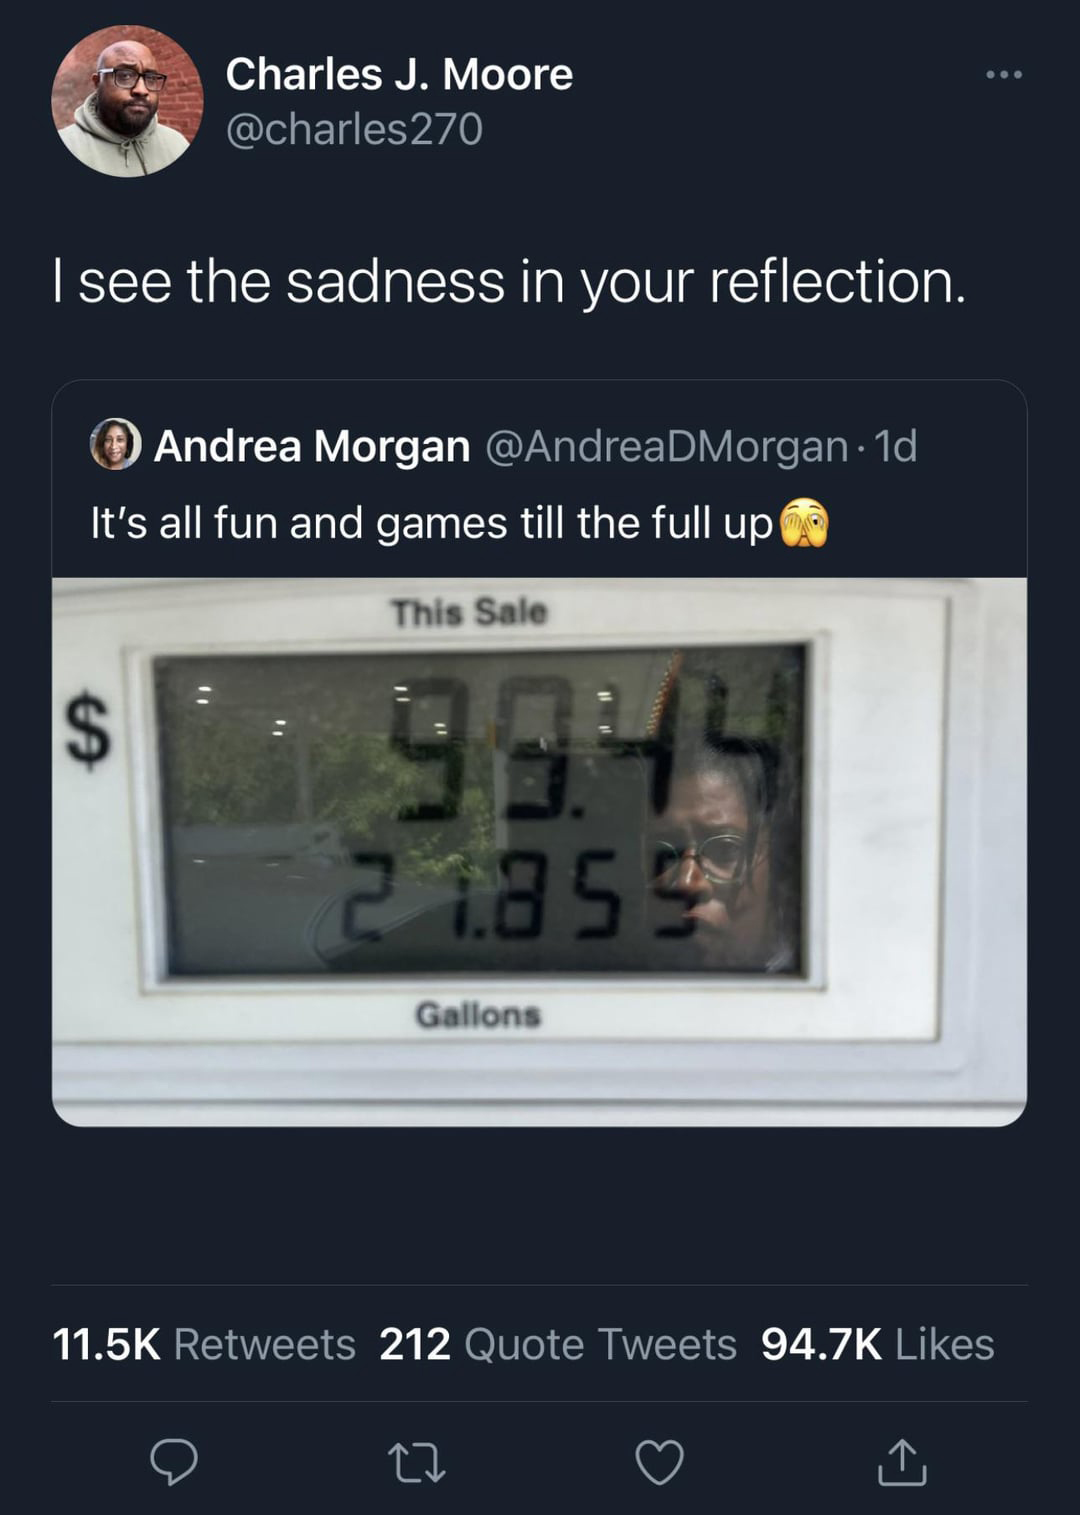 funny tweets and memes - multimedia - Charles J. Moore I see the sadness in your reflection. Andrea Morgan . 1d It's all fun and games till the full up $ This Sale 21.855 Gallons ... 212 Quote Tweets 27